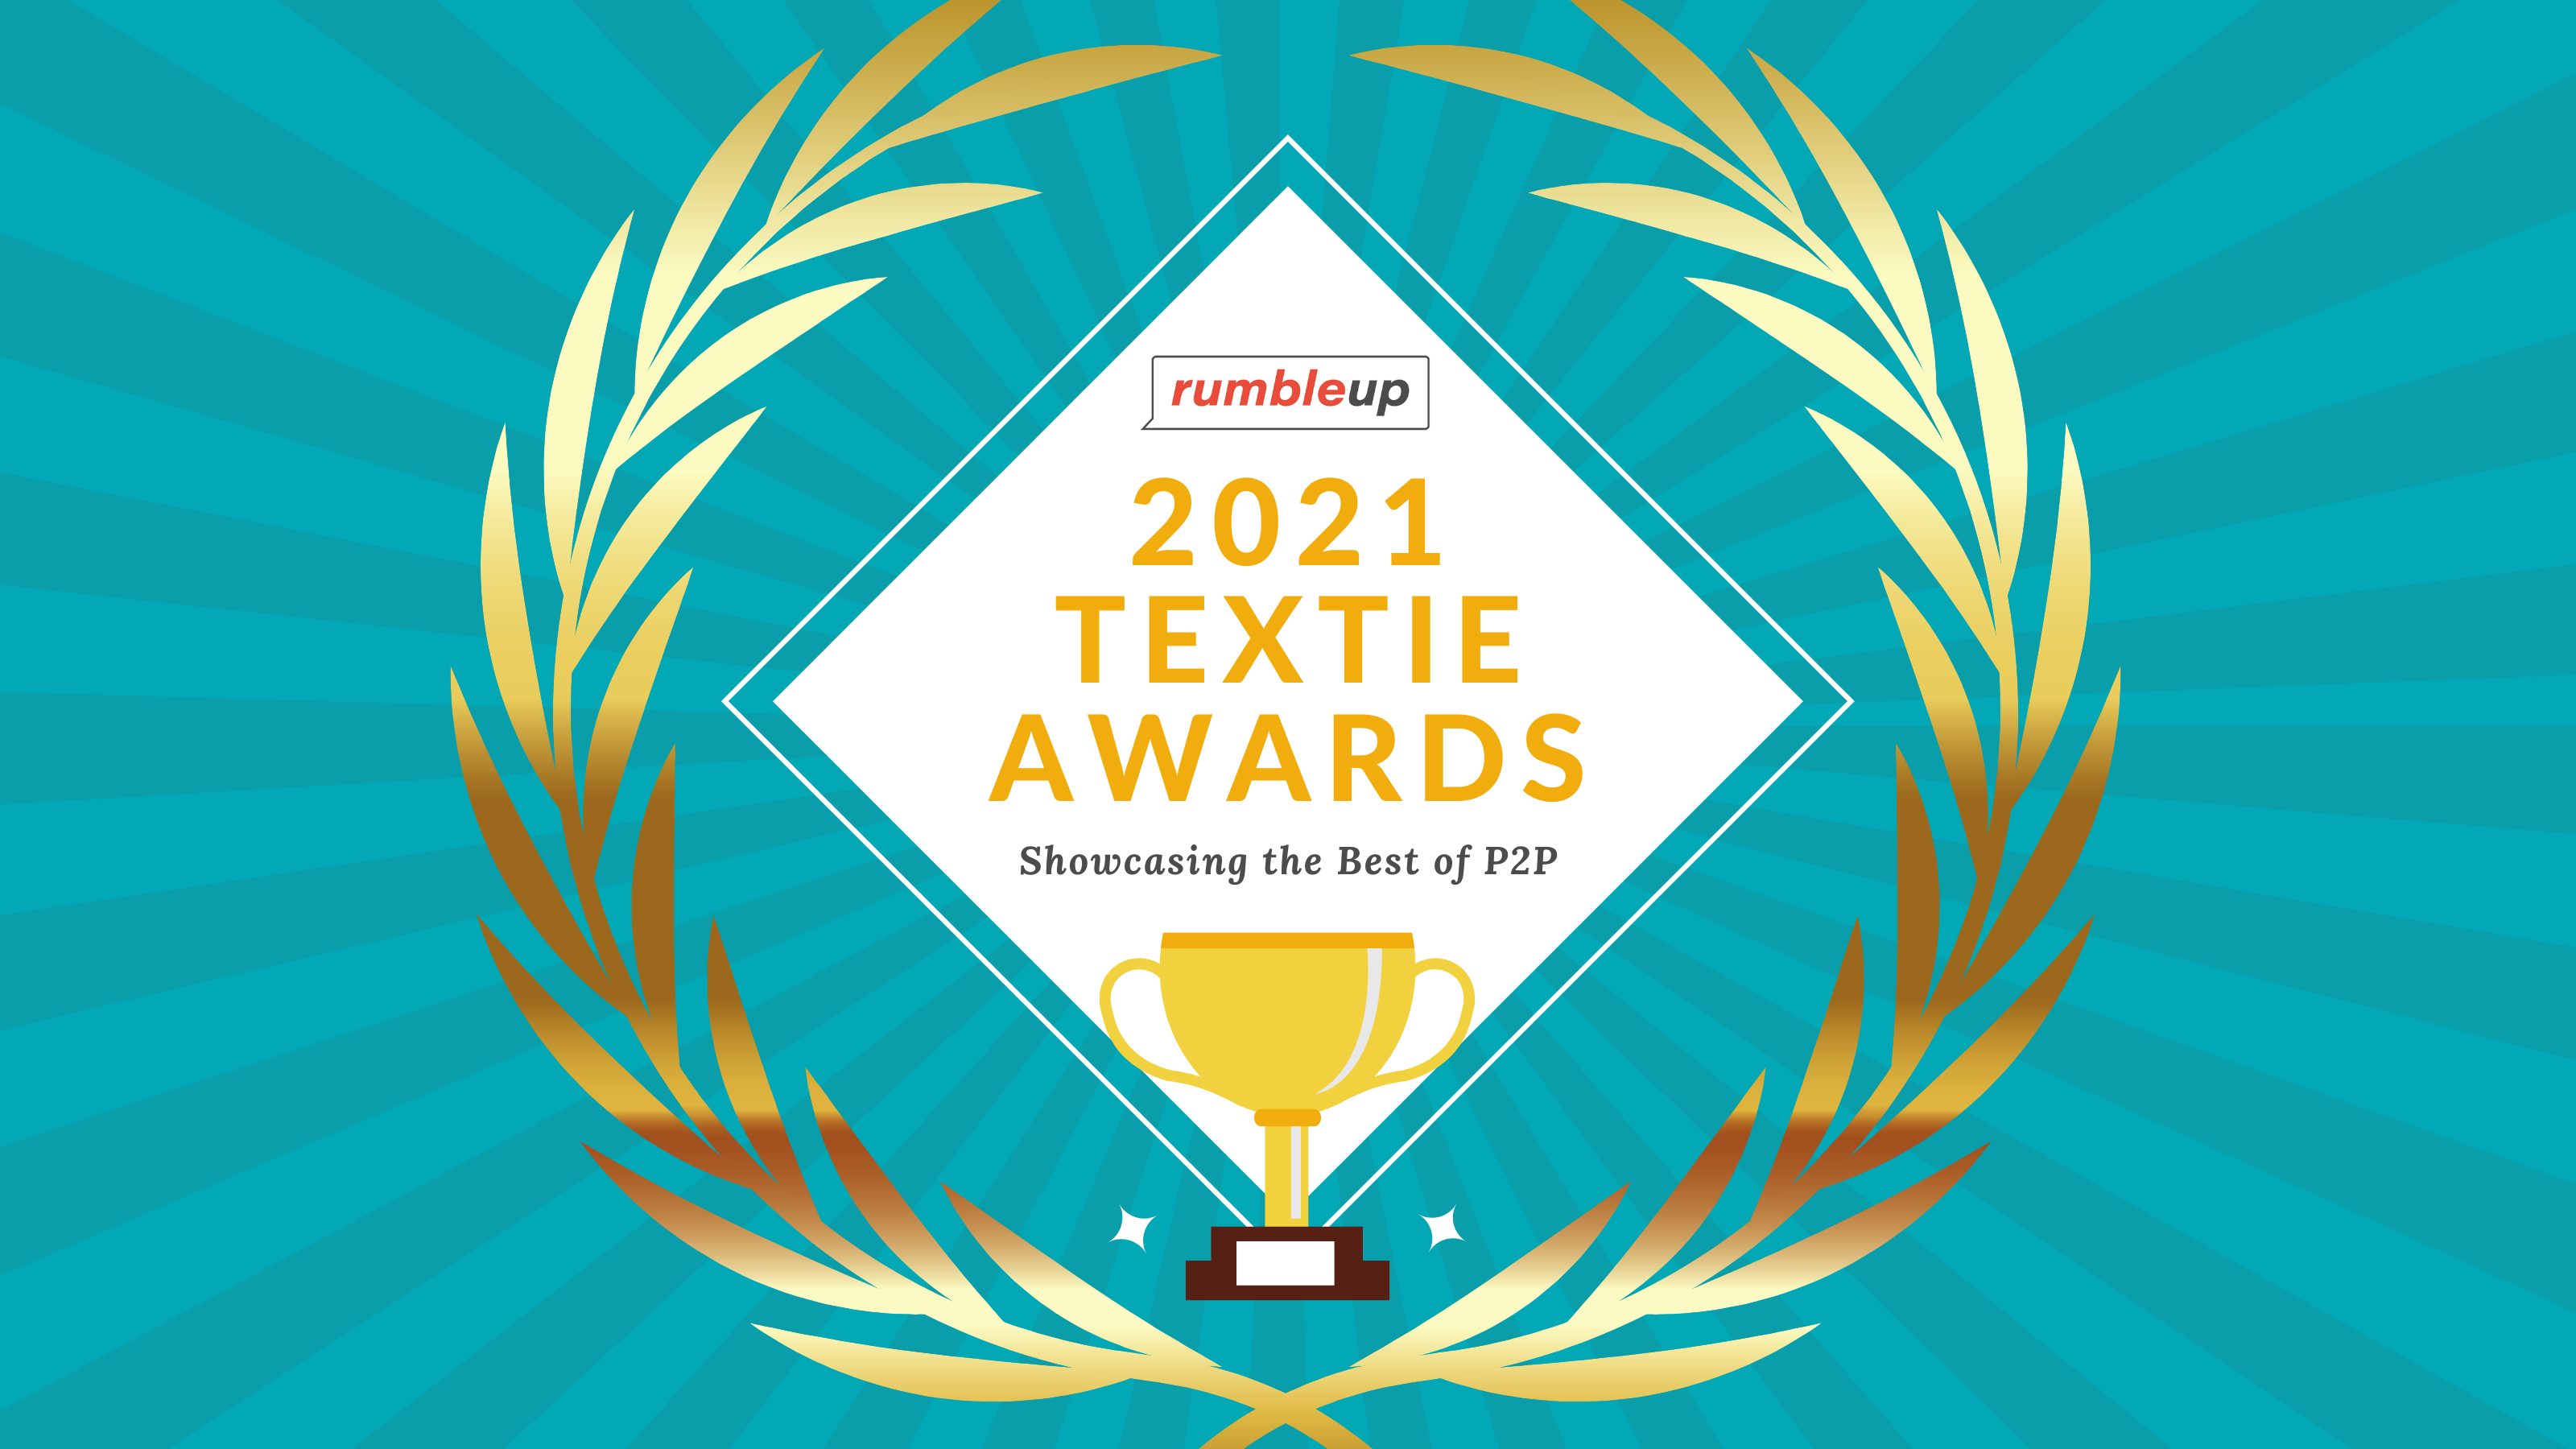 The 2021 Textie Awards: Celebrating The 9 Best Uses of P2P Texting in 2020